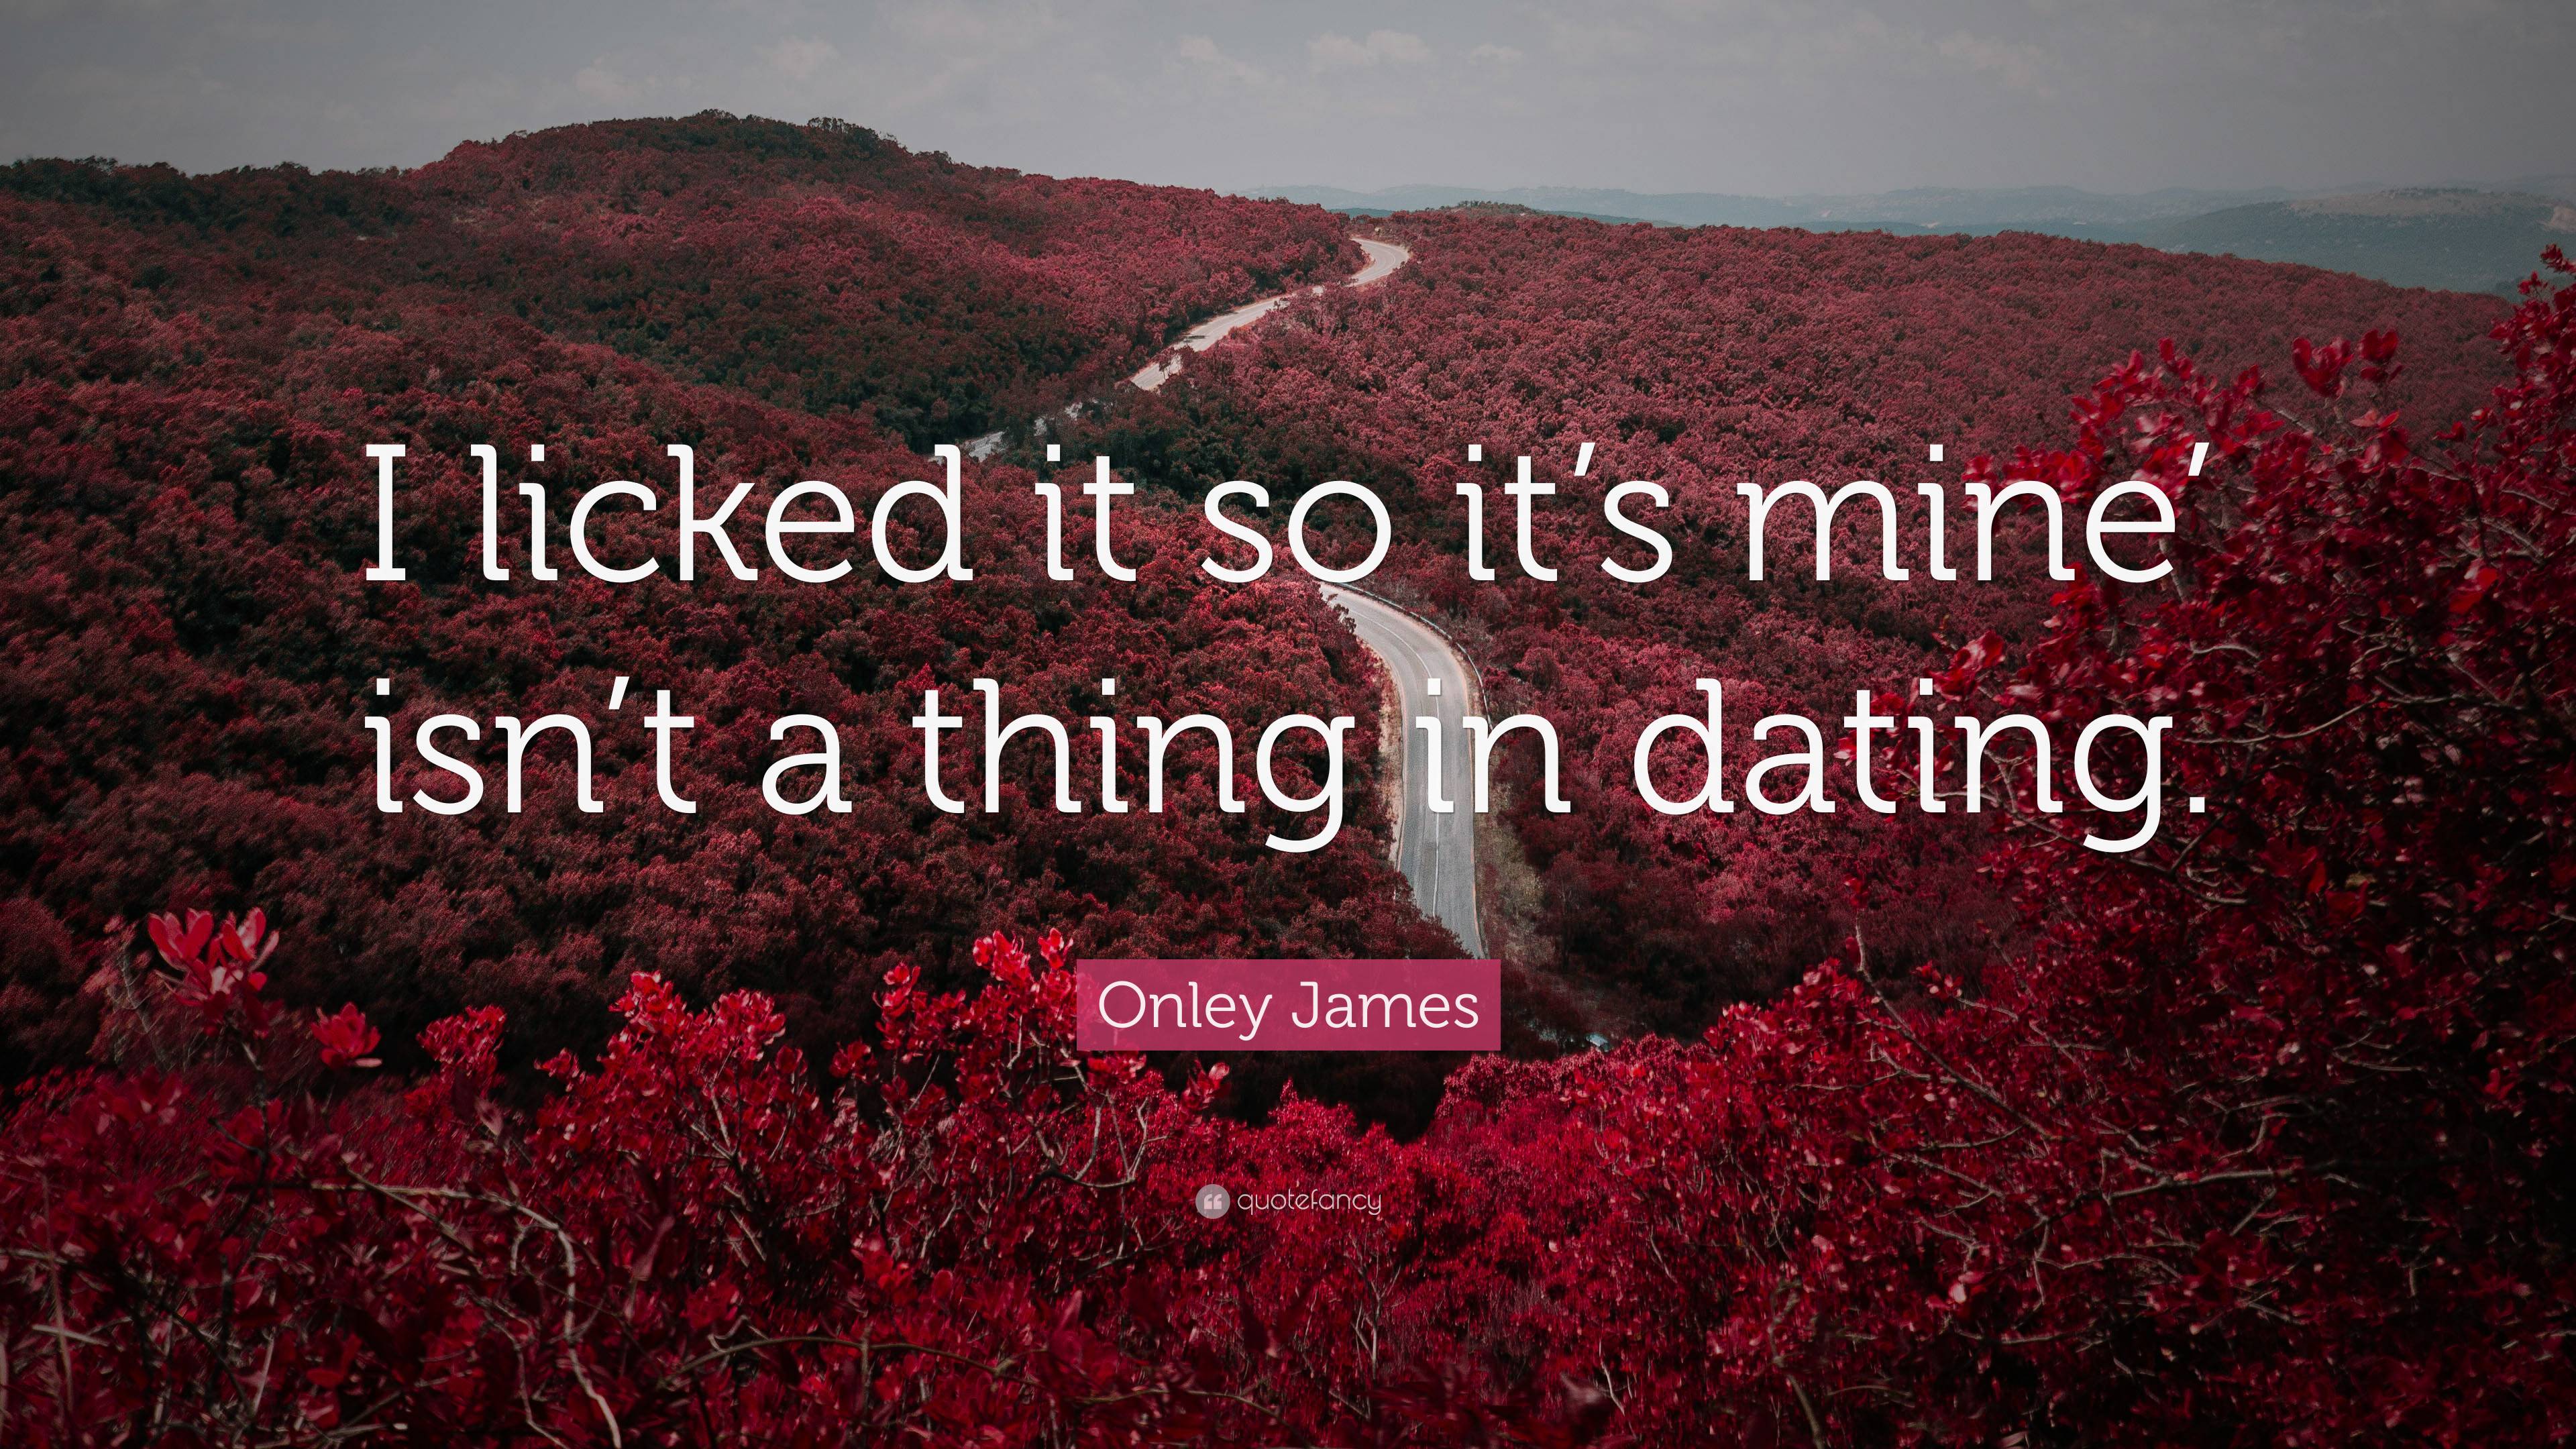 https://quotefancy.com/media/wallpaper/3840x2160/7222210-Onley-James-Quote-I-licked-it-so-it-s-mine-isn-t-a-thing-in-dating.jpg